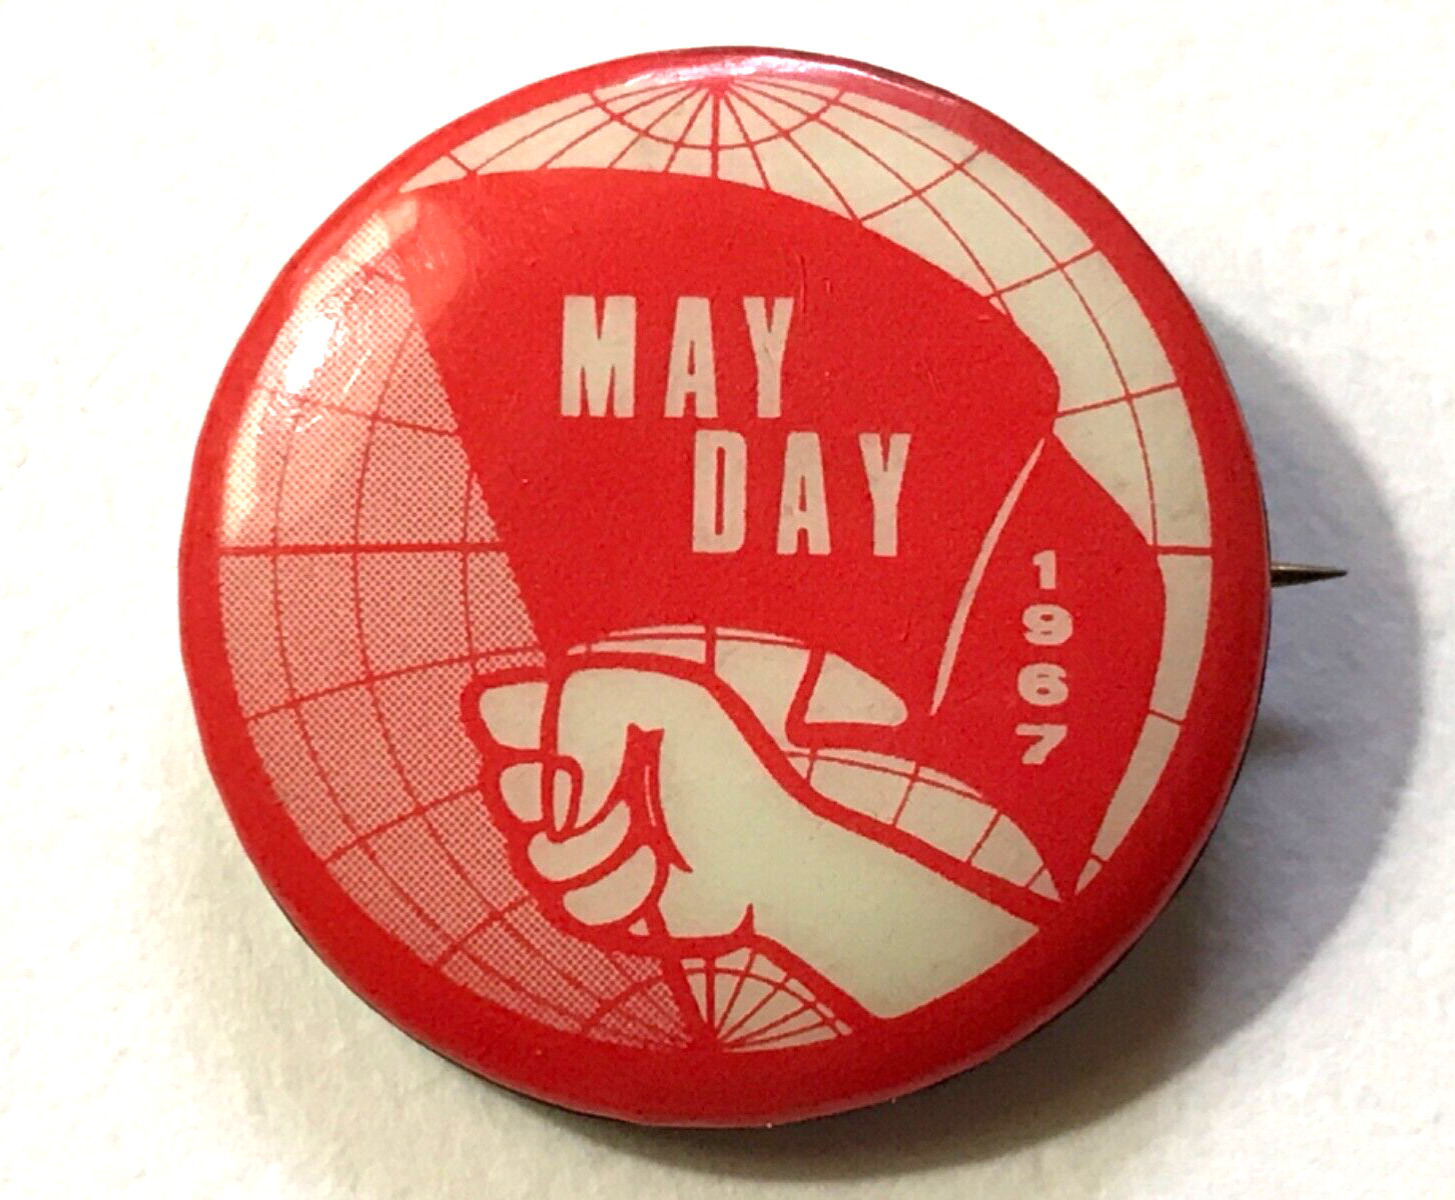 USA MAY DAY 1967 Pinback Button World Peace Friendship Flag.